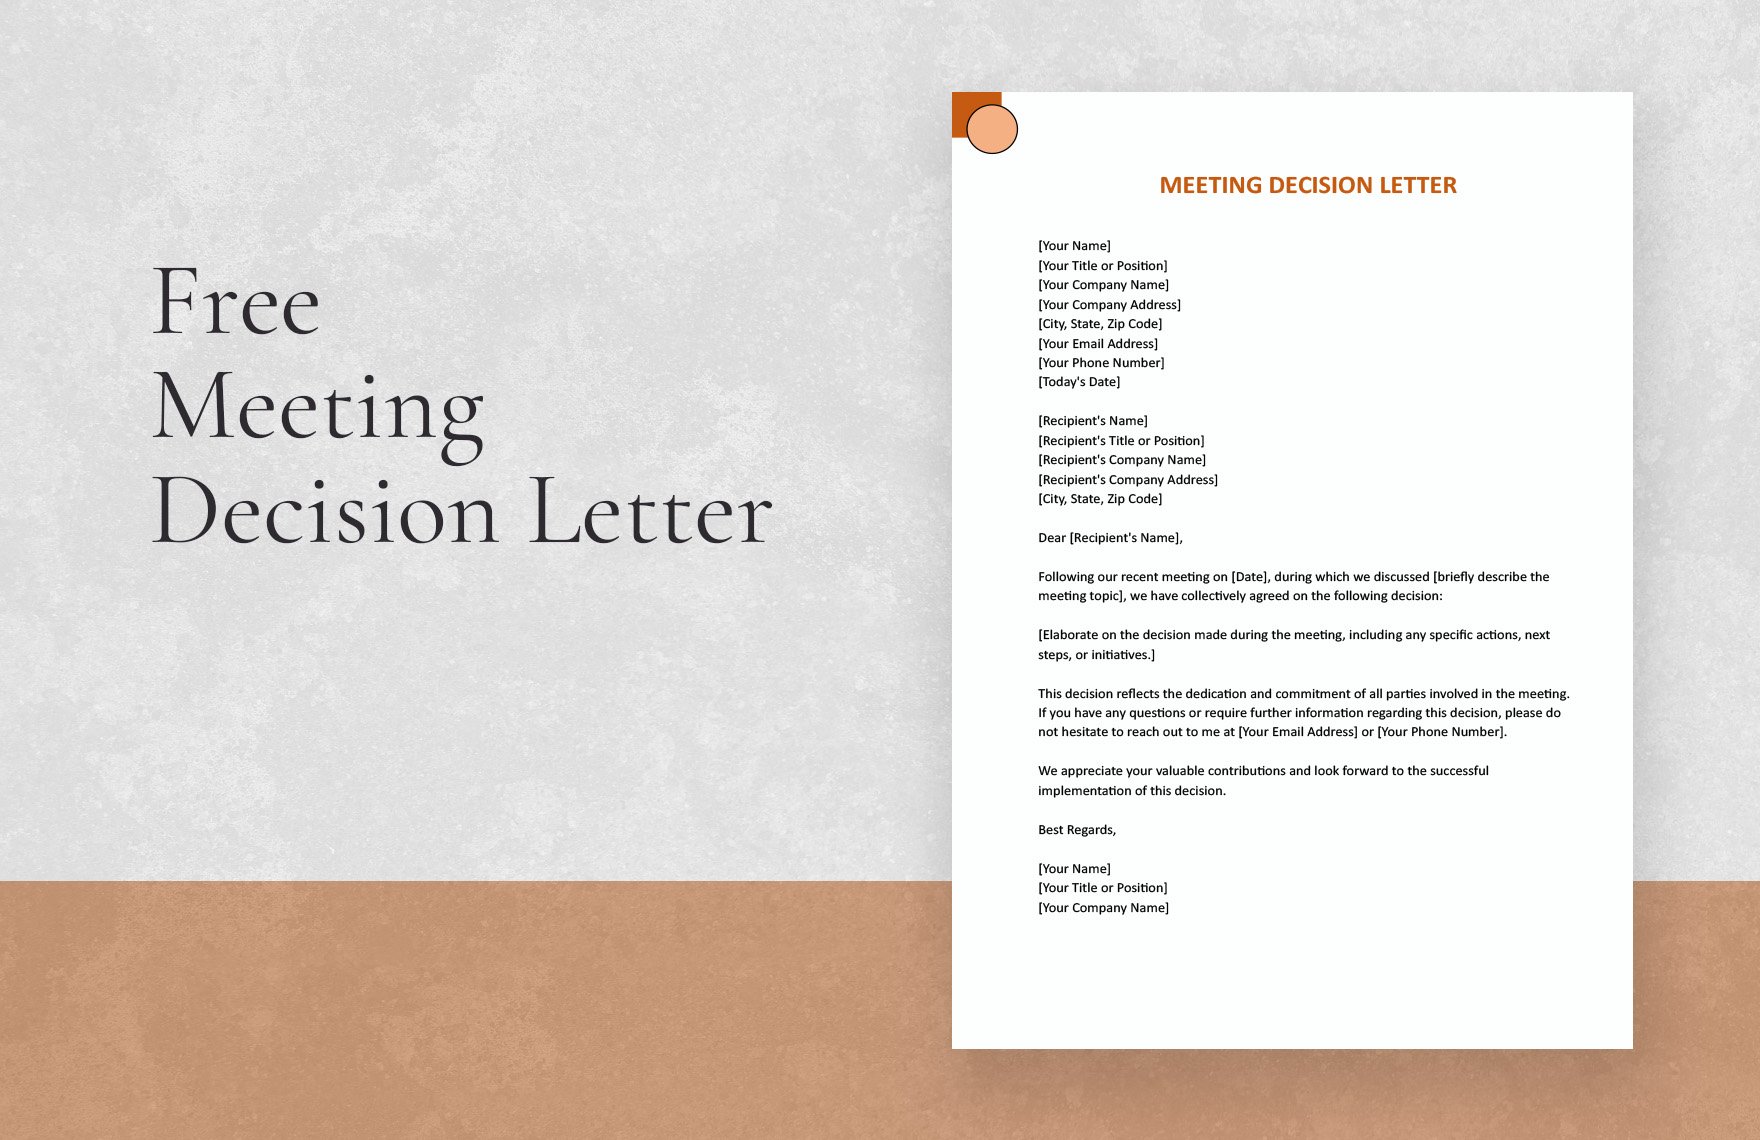 Meeting Decision Letter